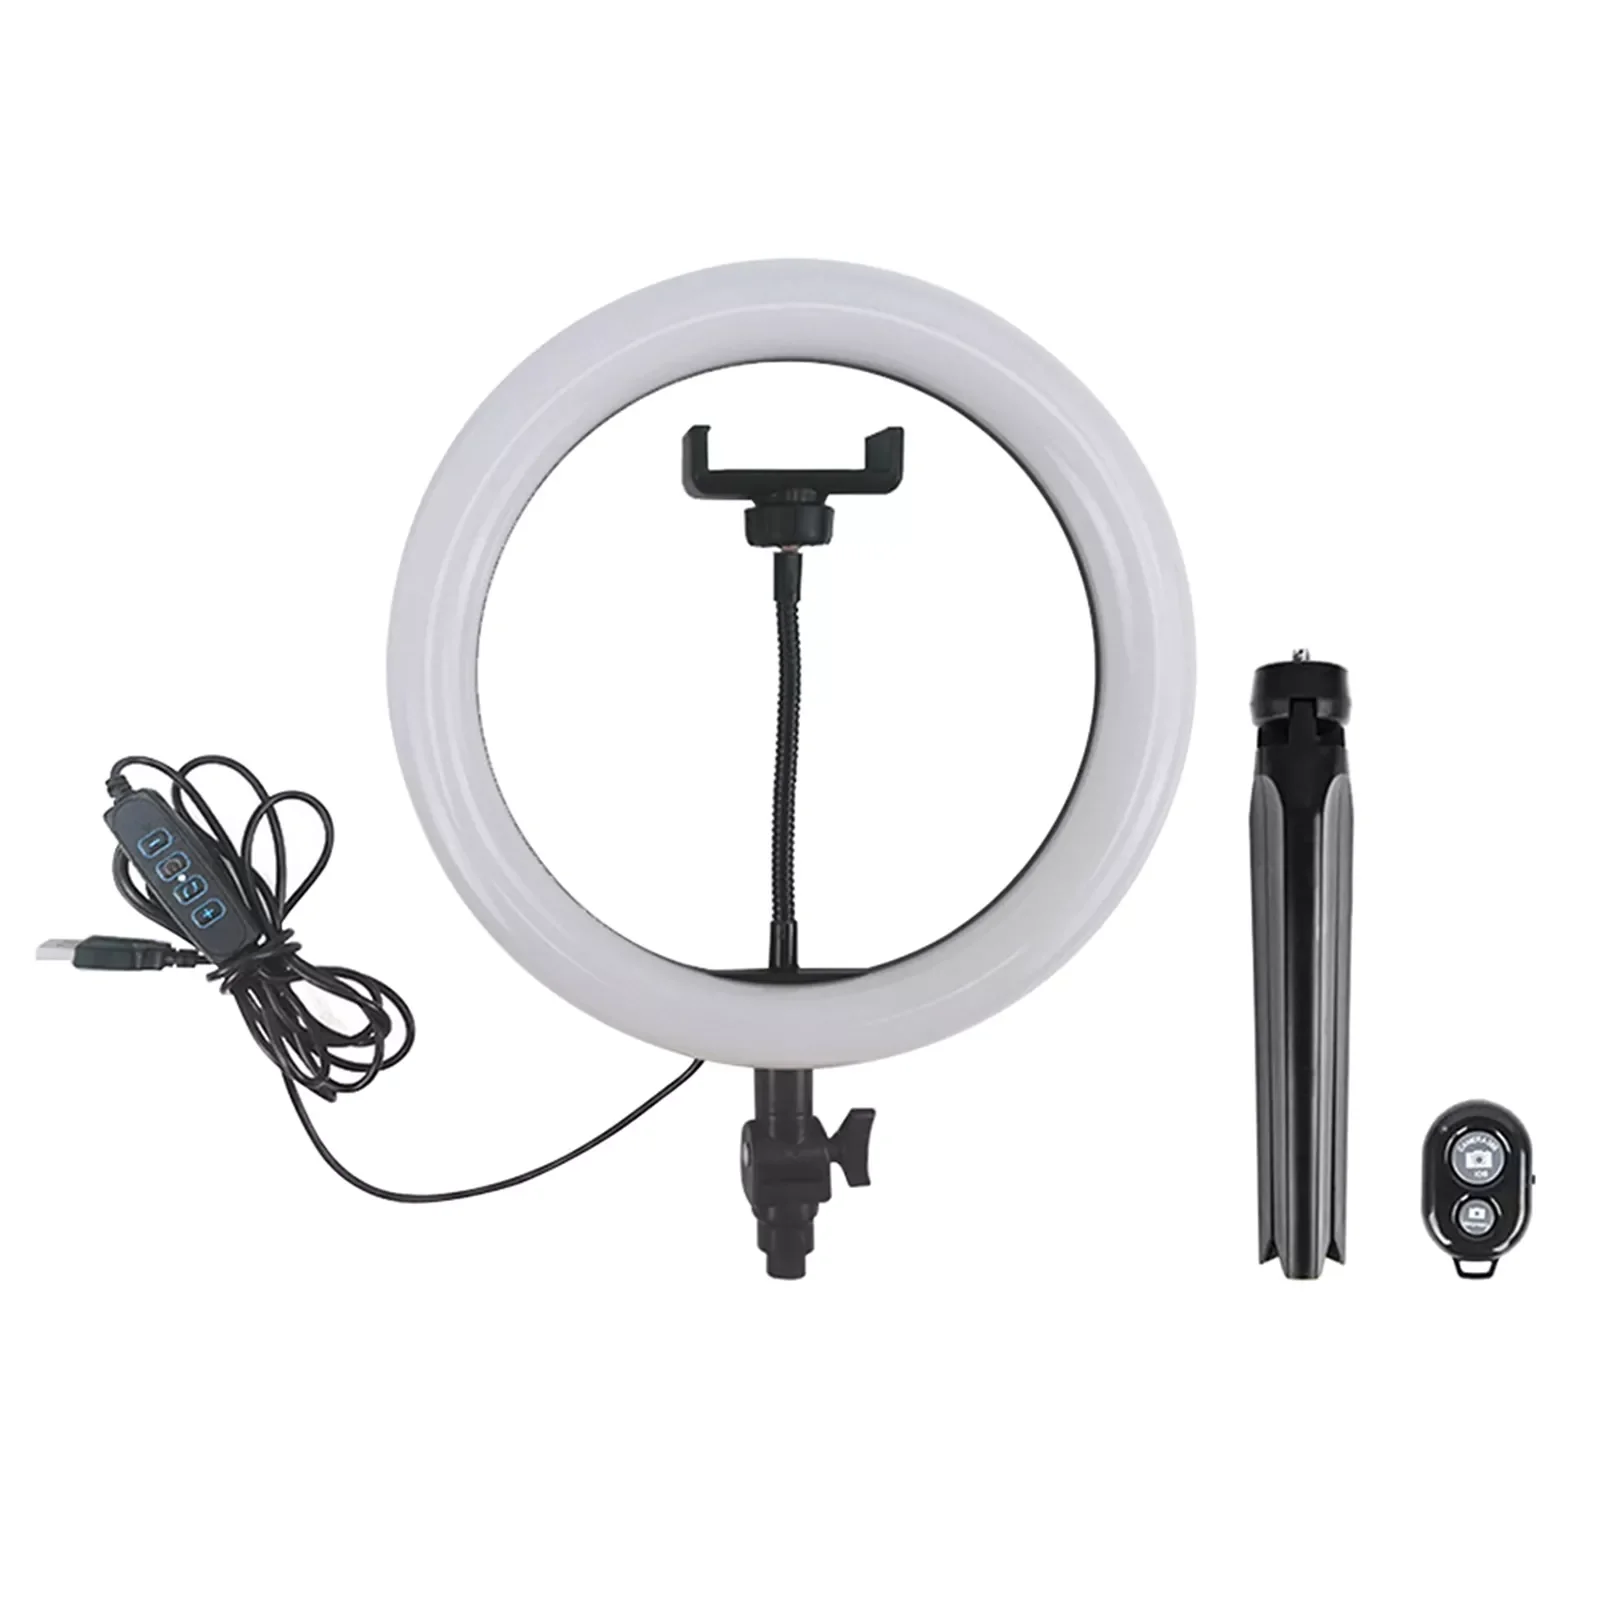 10inch Video Recording 10 Brightness Levels Selfie LED Ring Lights Makeup With Tripod Stand Live Streaming USB Remote Control